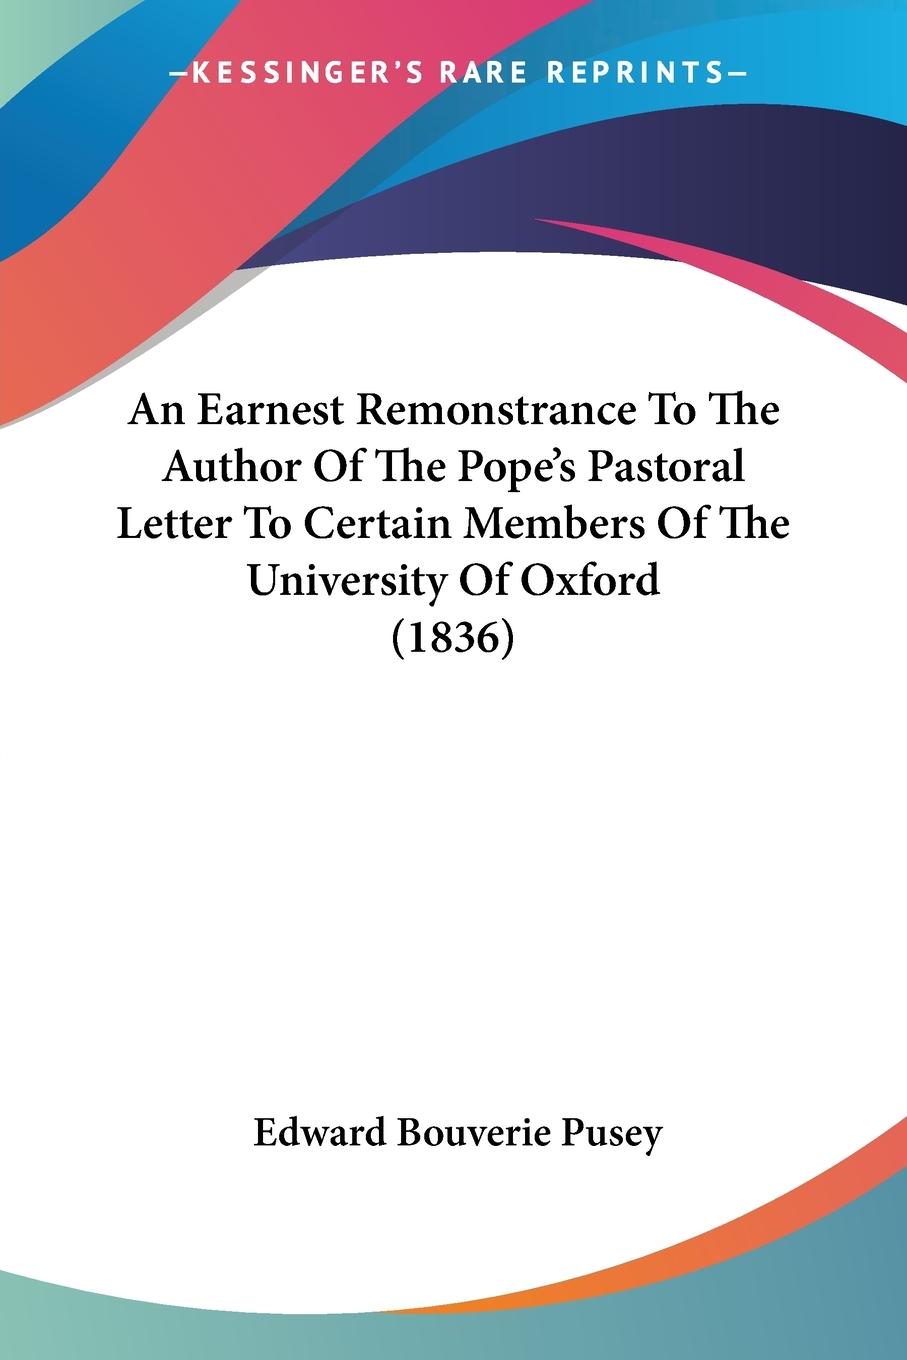 An Earnest Remonstrance To The Author Of The Pope s Pastoral Letter To Certain Members Of The University Of Oxford (1836) - Pusey, Edward Bouverie